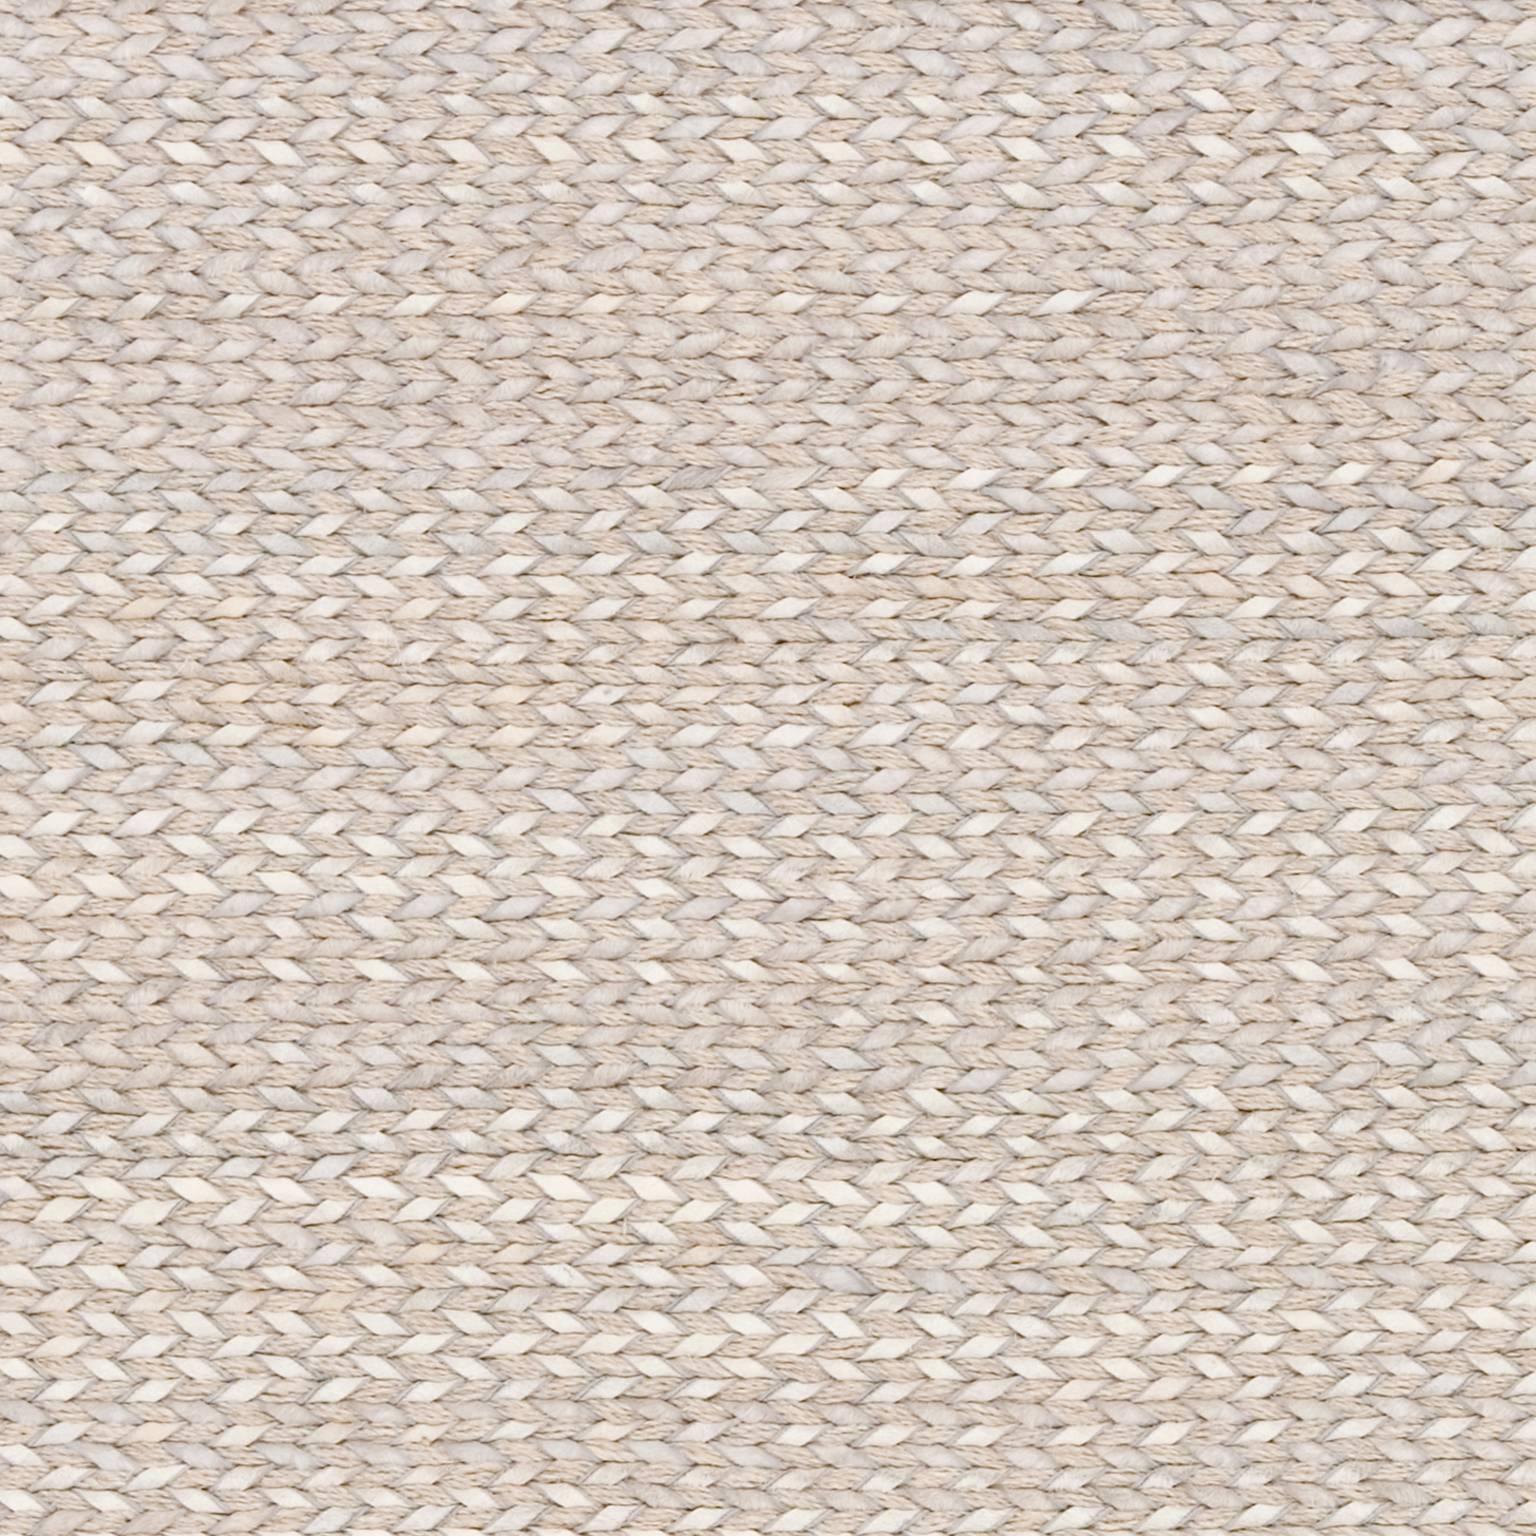 Rustic Contemporary South American Mat